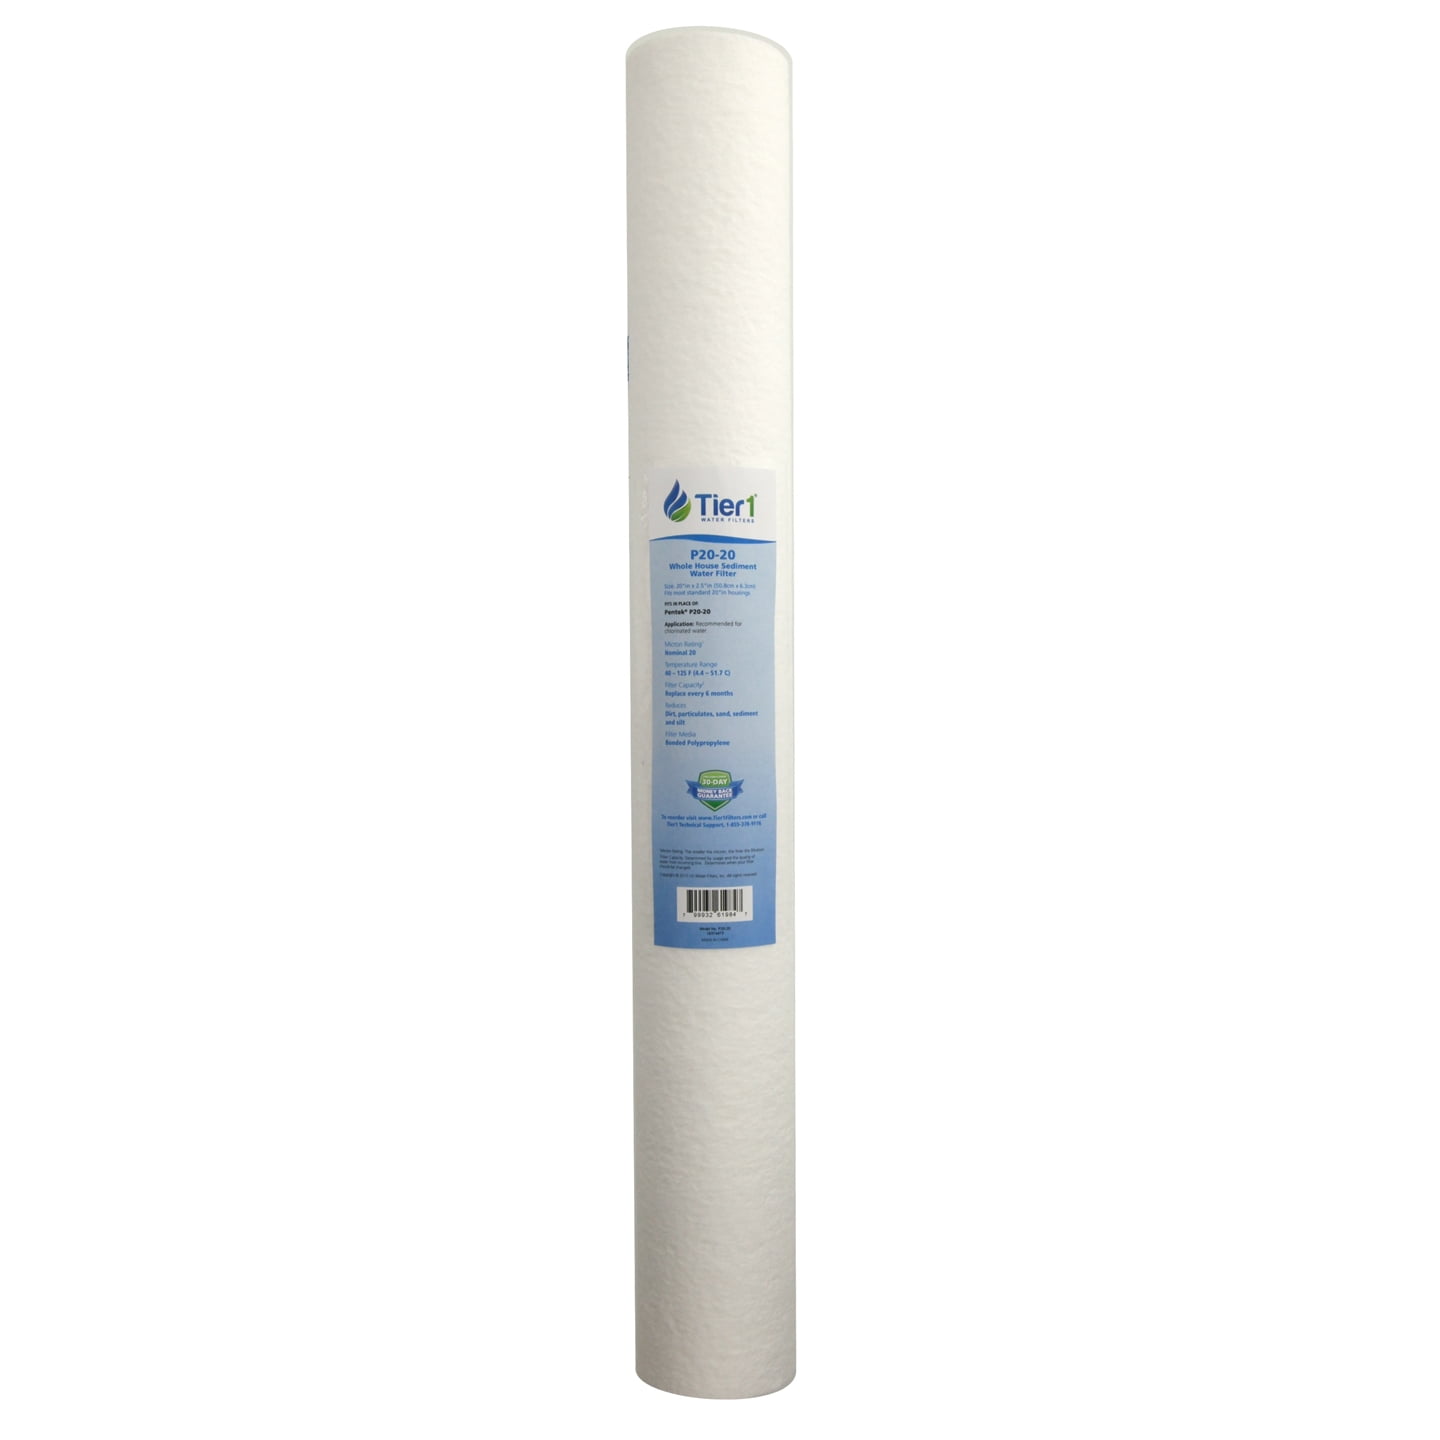 1 or 5 Micron 25 20"x2.5"  Whole House Sediment Water Filter Cartridge 